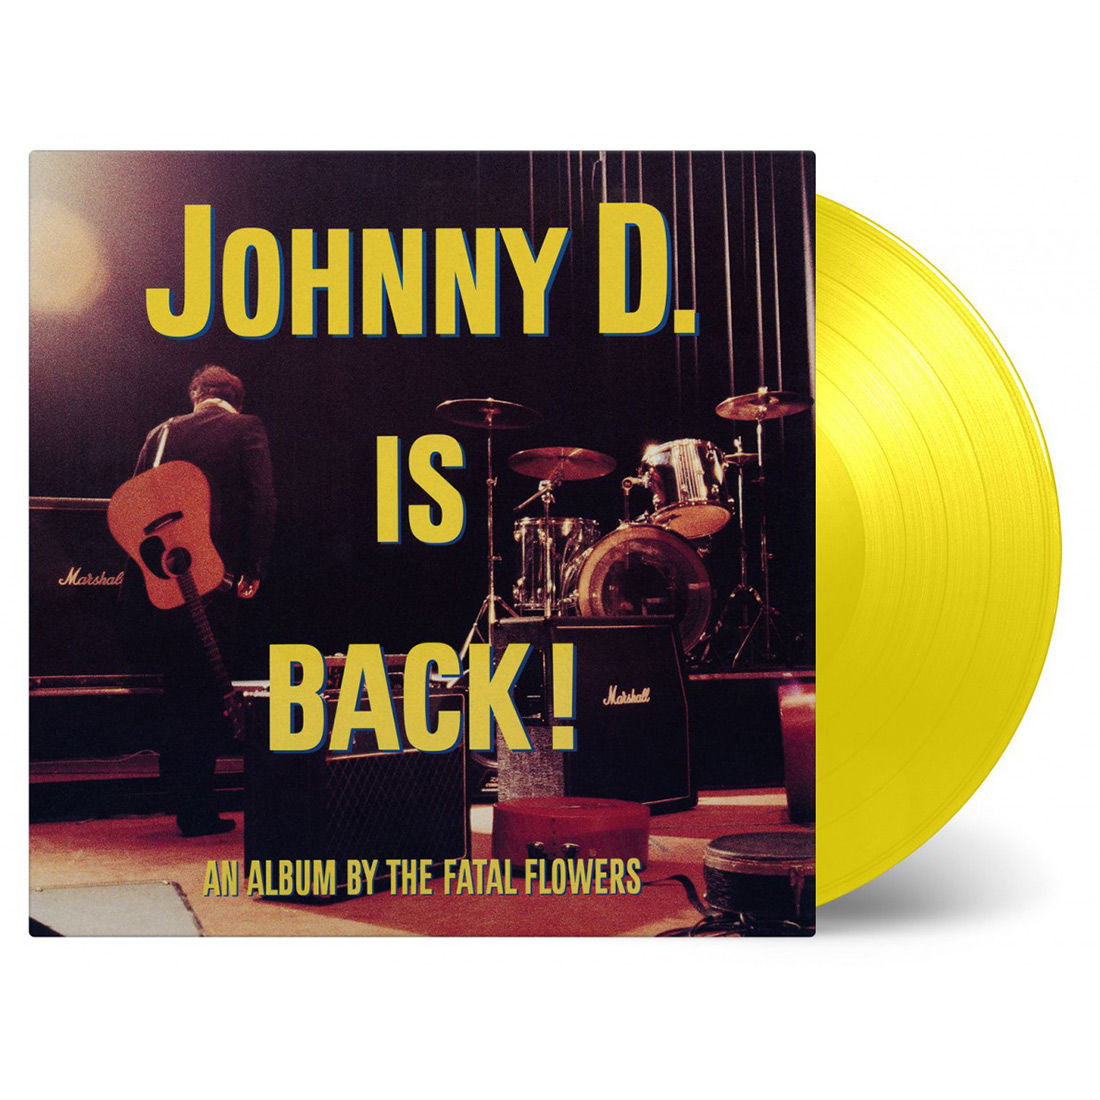 Johnny D Is Back!: Limited Yellow Vinyl LP